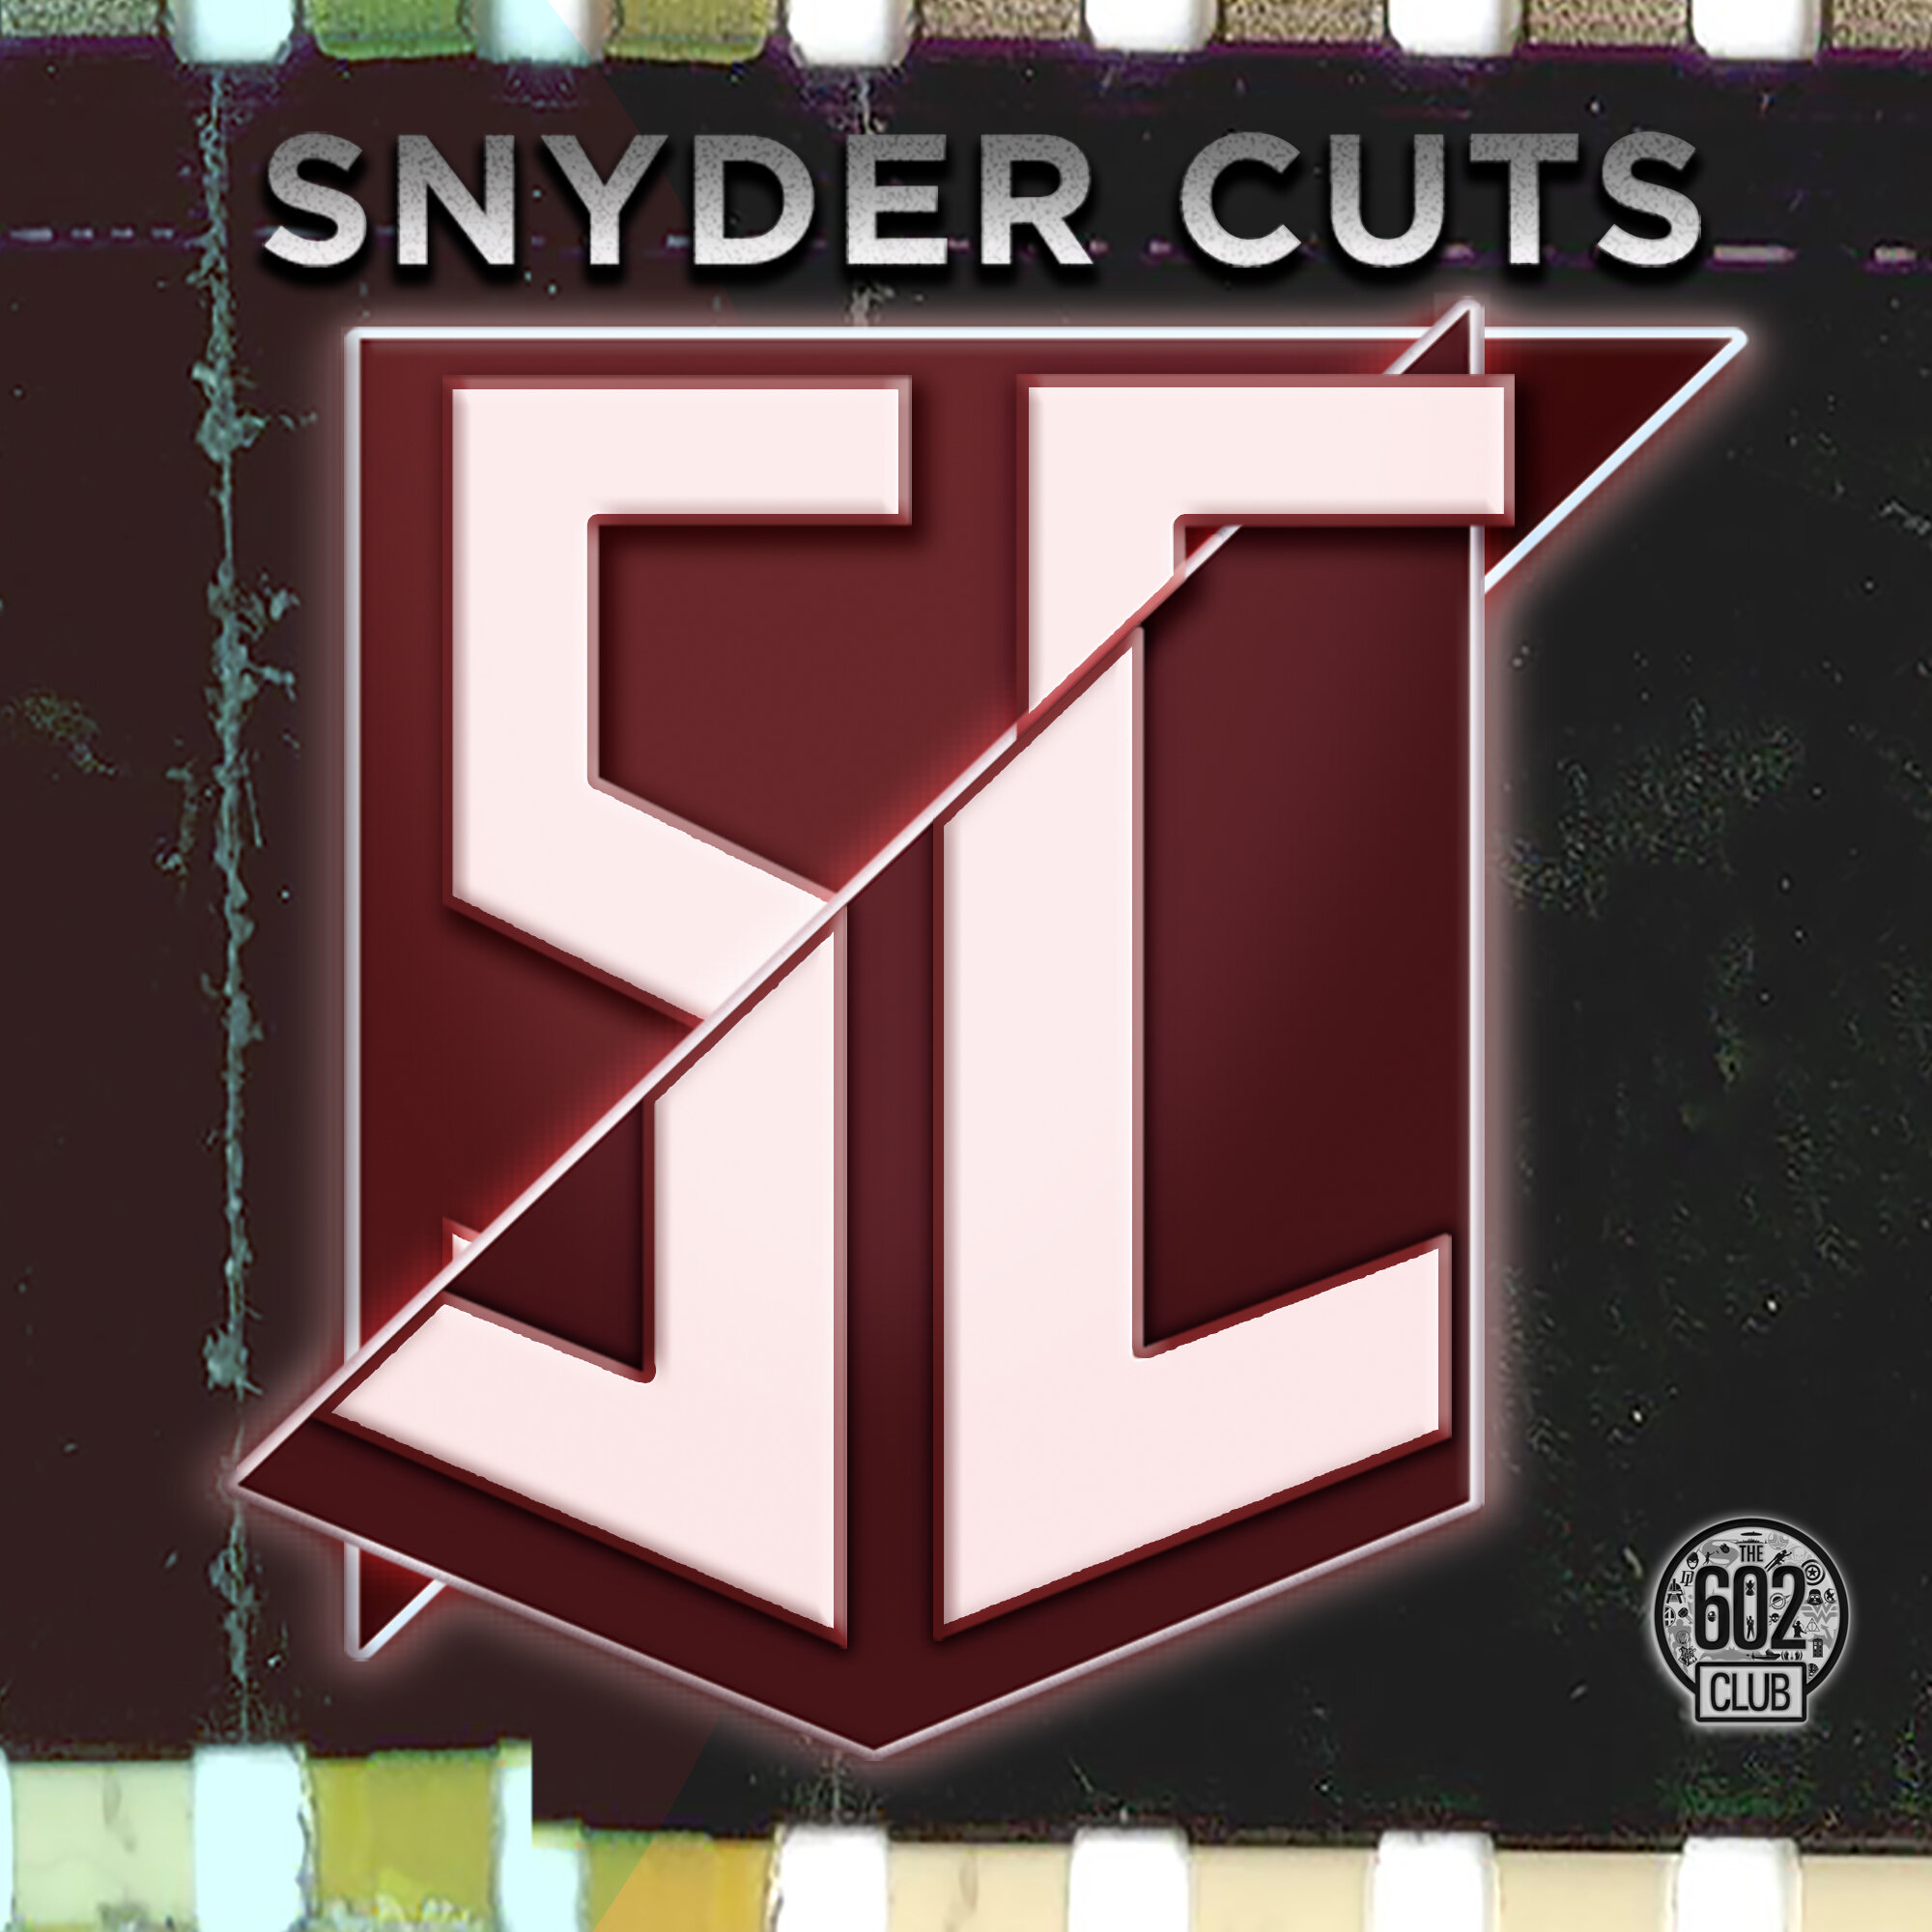 Snyder-Cuts-Frame-with-602.jpg